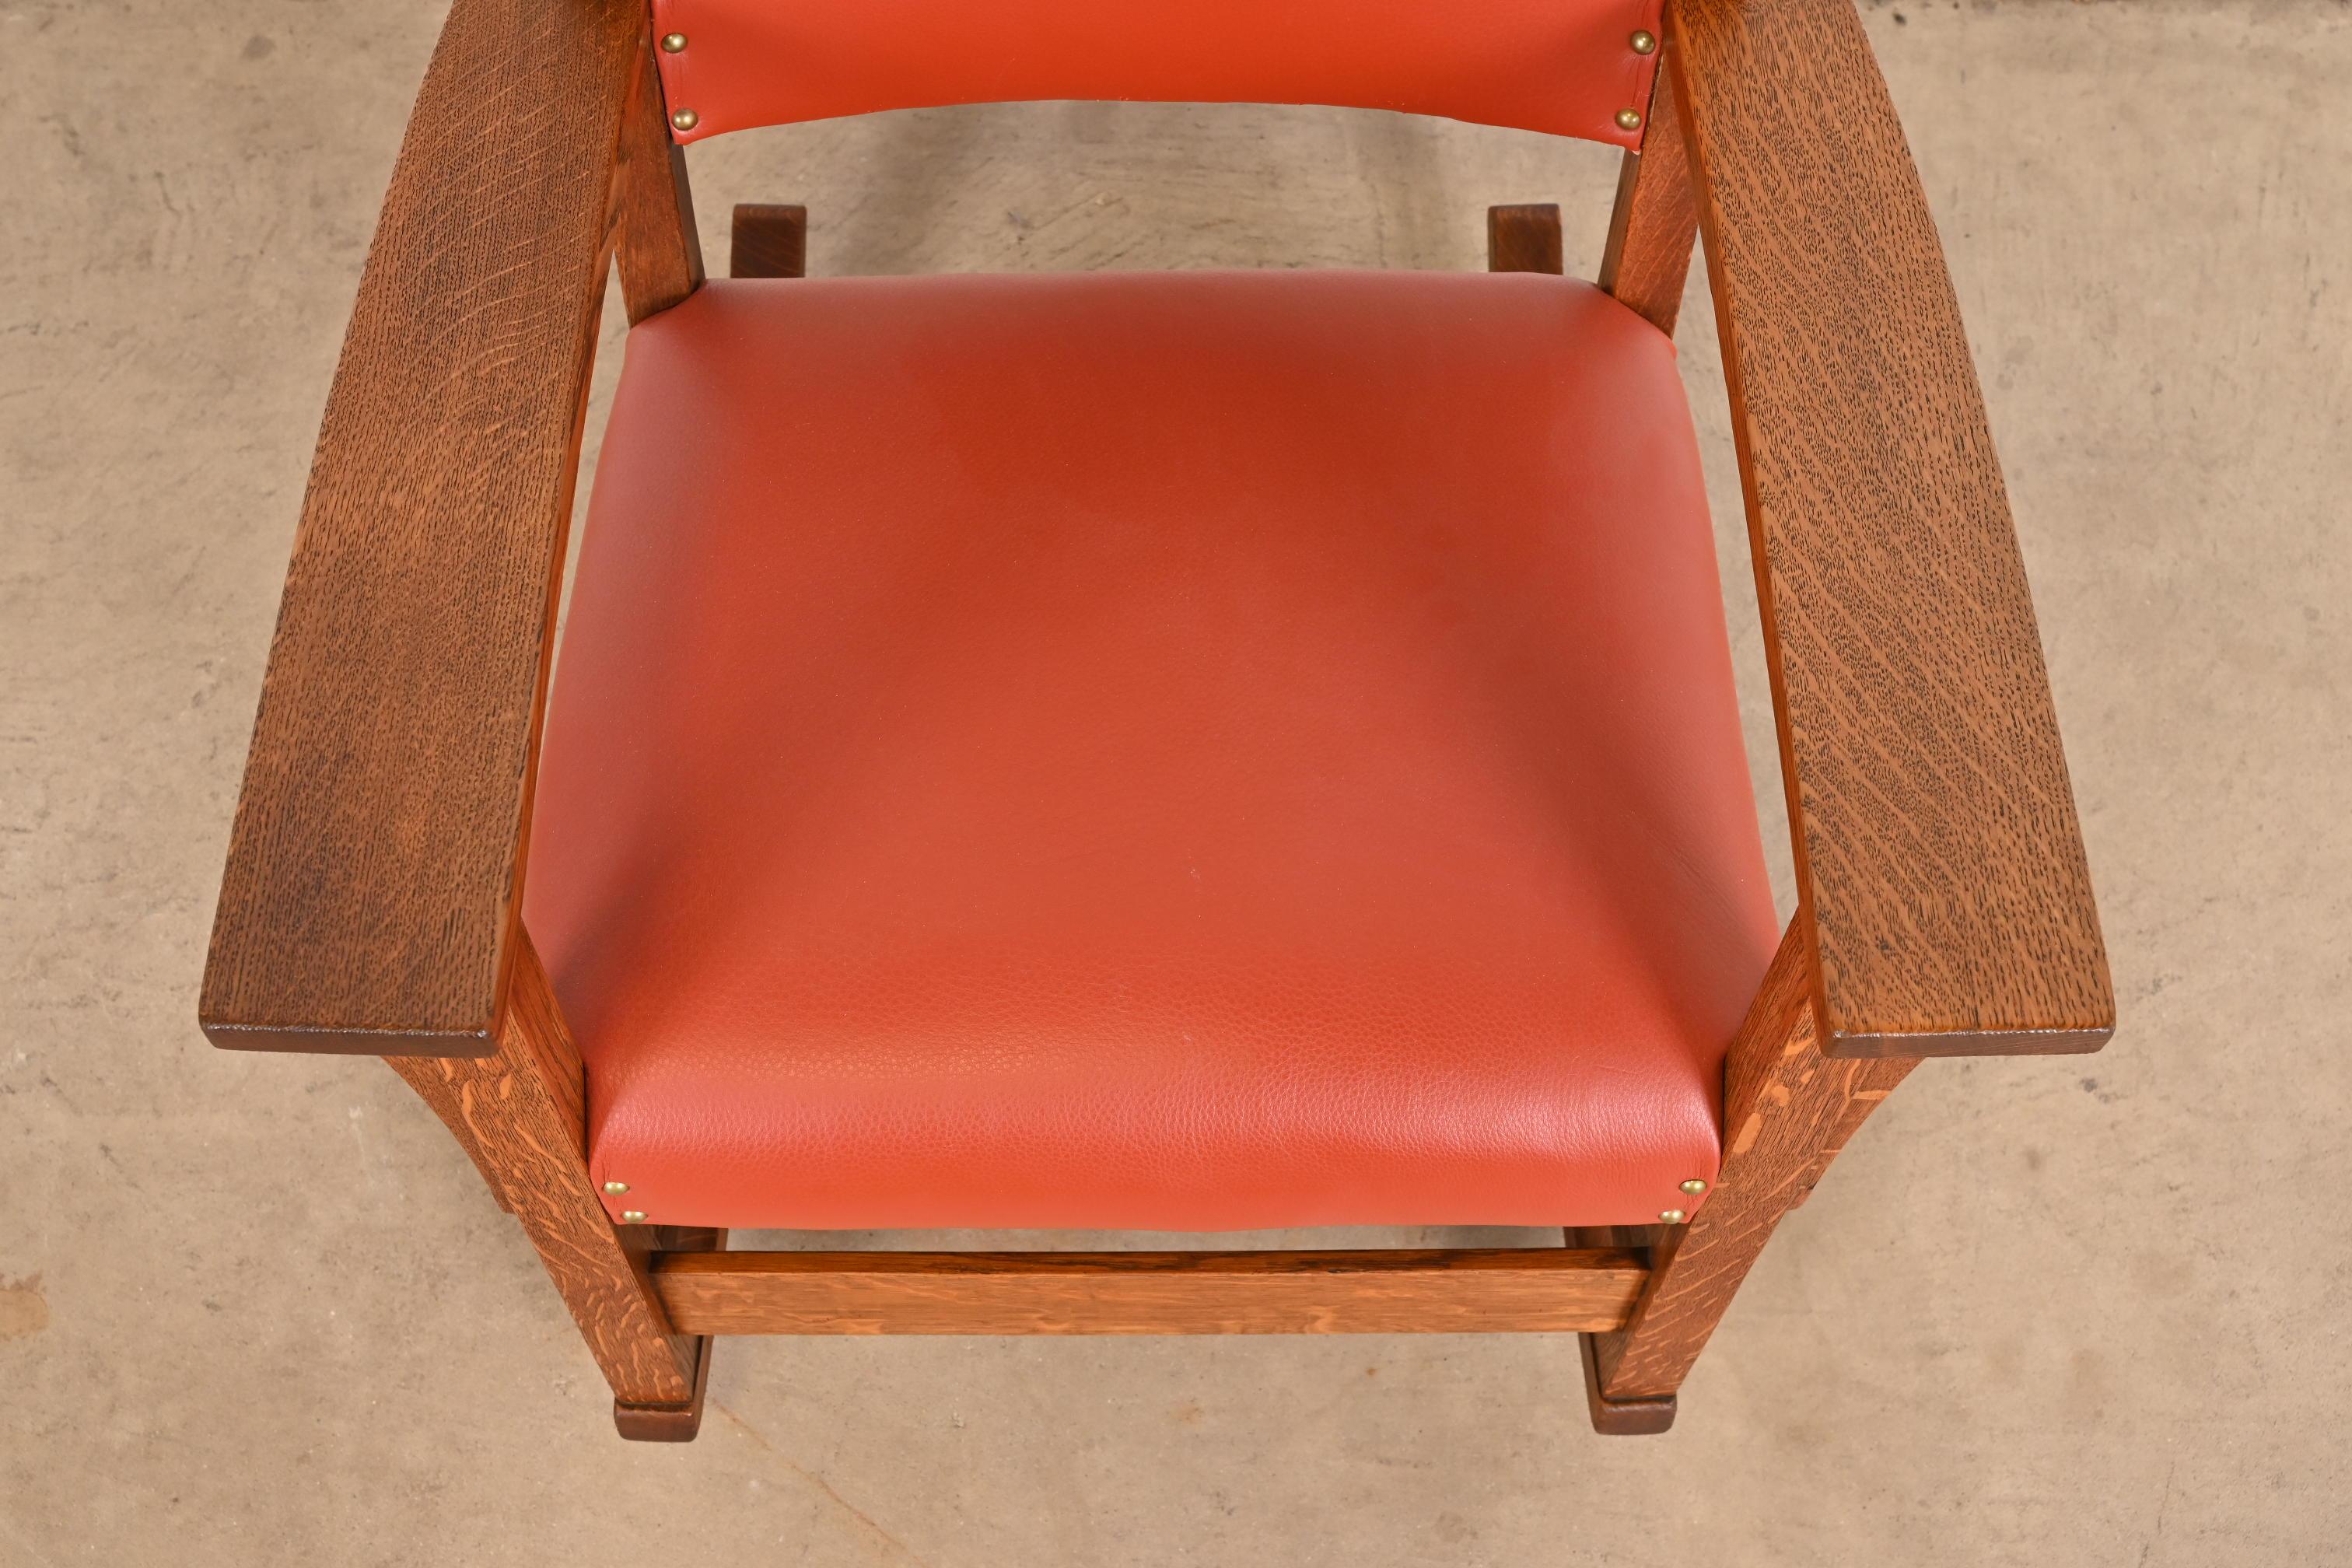 20th Century Gustav Stickley Arts & Crafts Oak and Leather Rocking Chair, Fully Restored For Sale